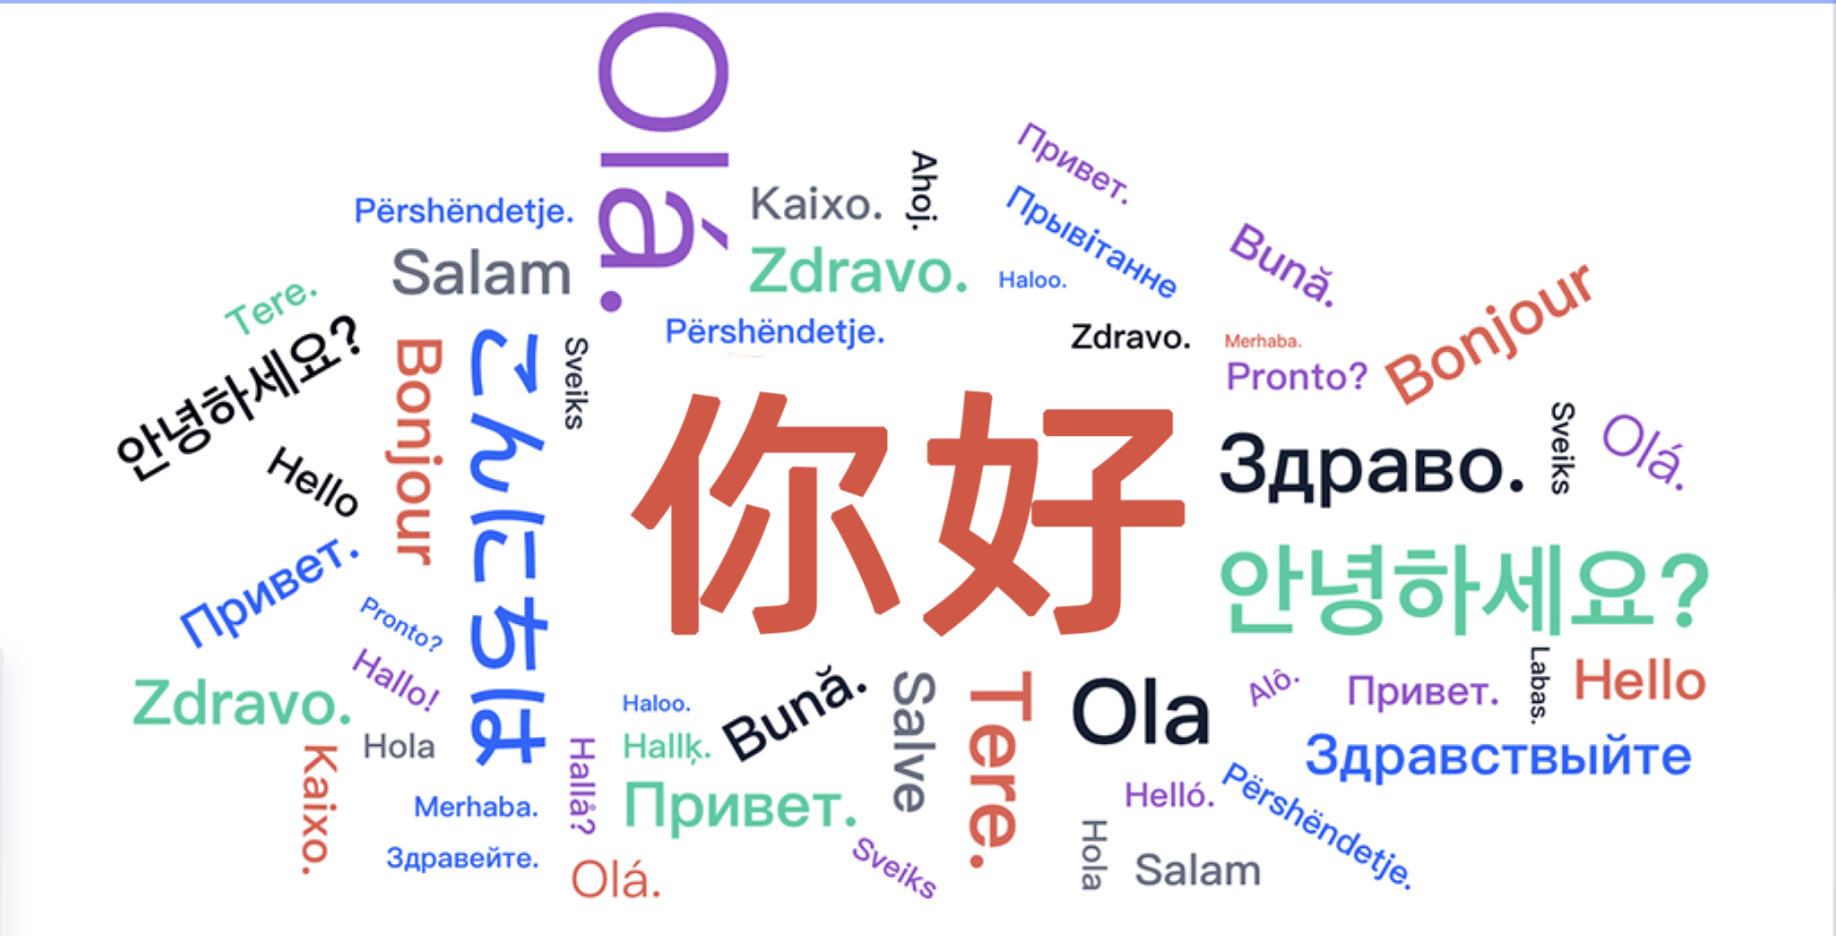 NLP machine translation panorama: from the basic principles to the full analysis of technical practice